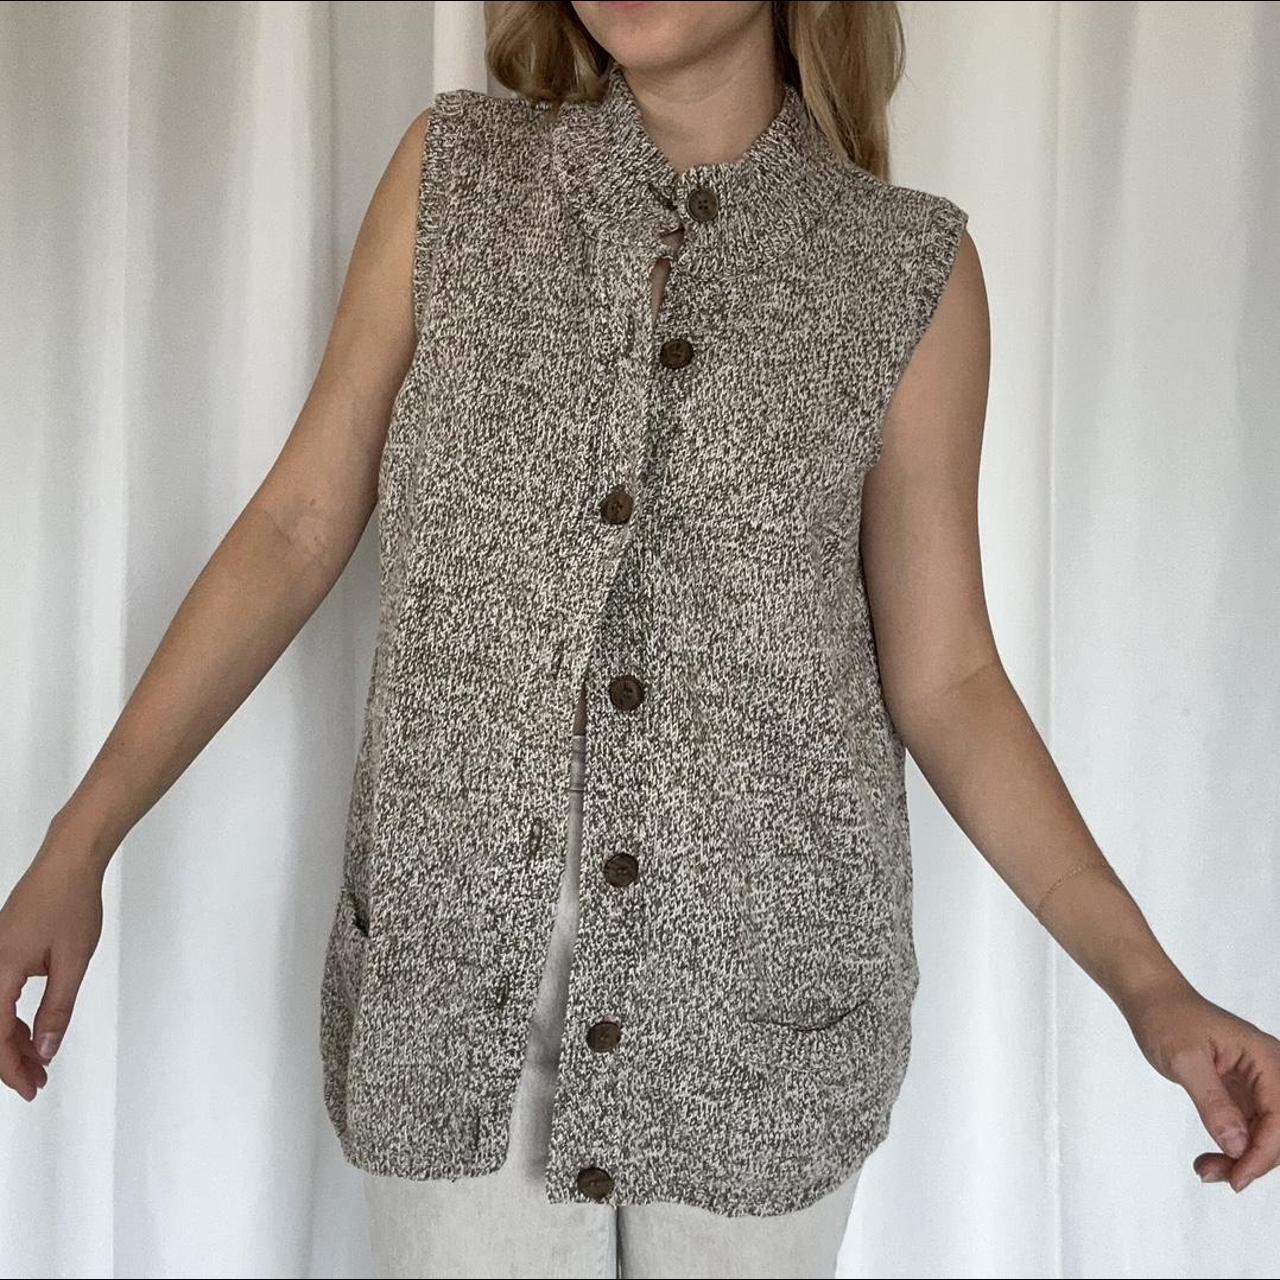 Women's retro knitted vest sleeveless cardigan pullover sweater top